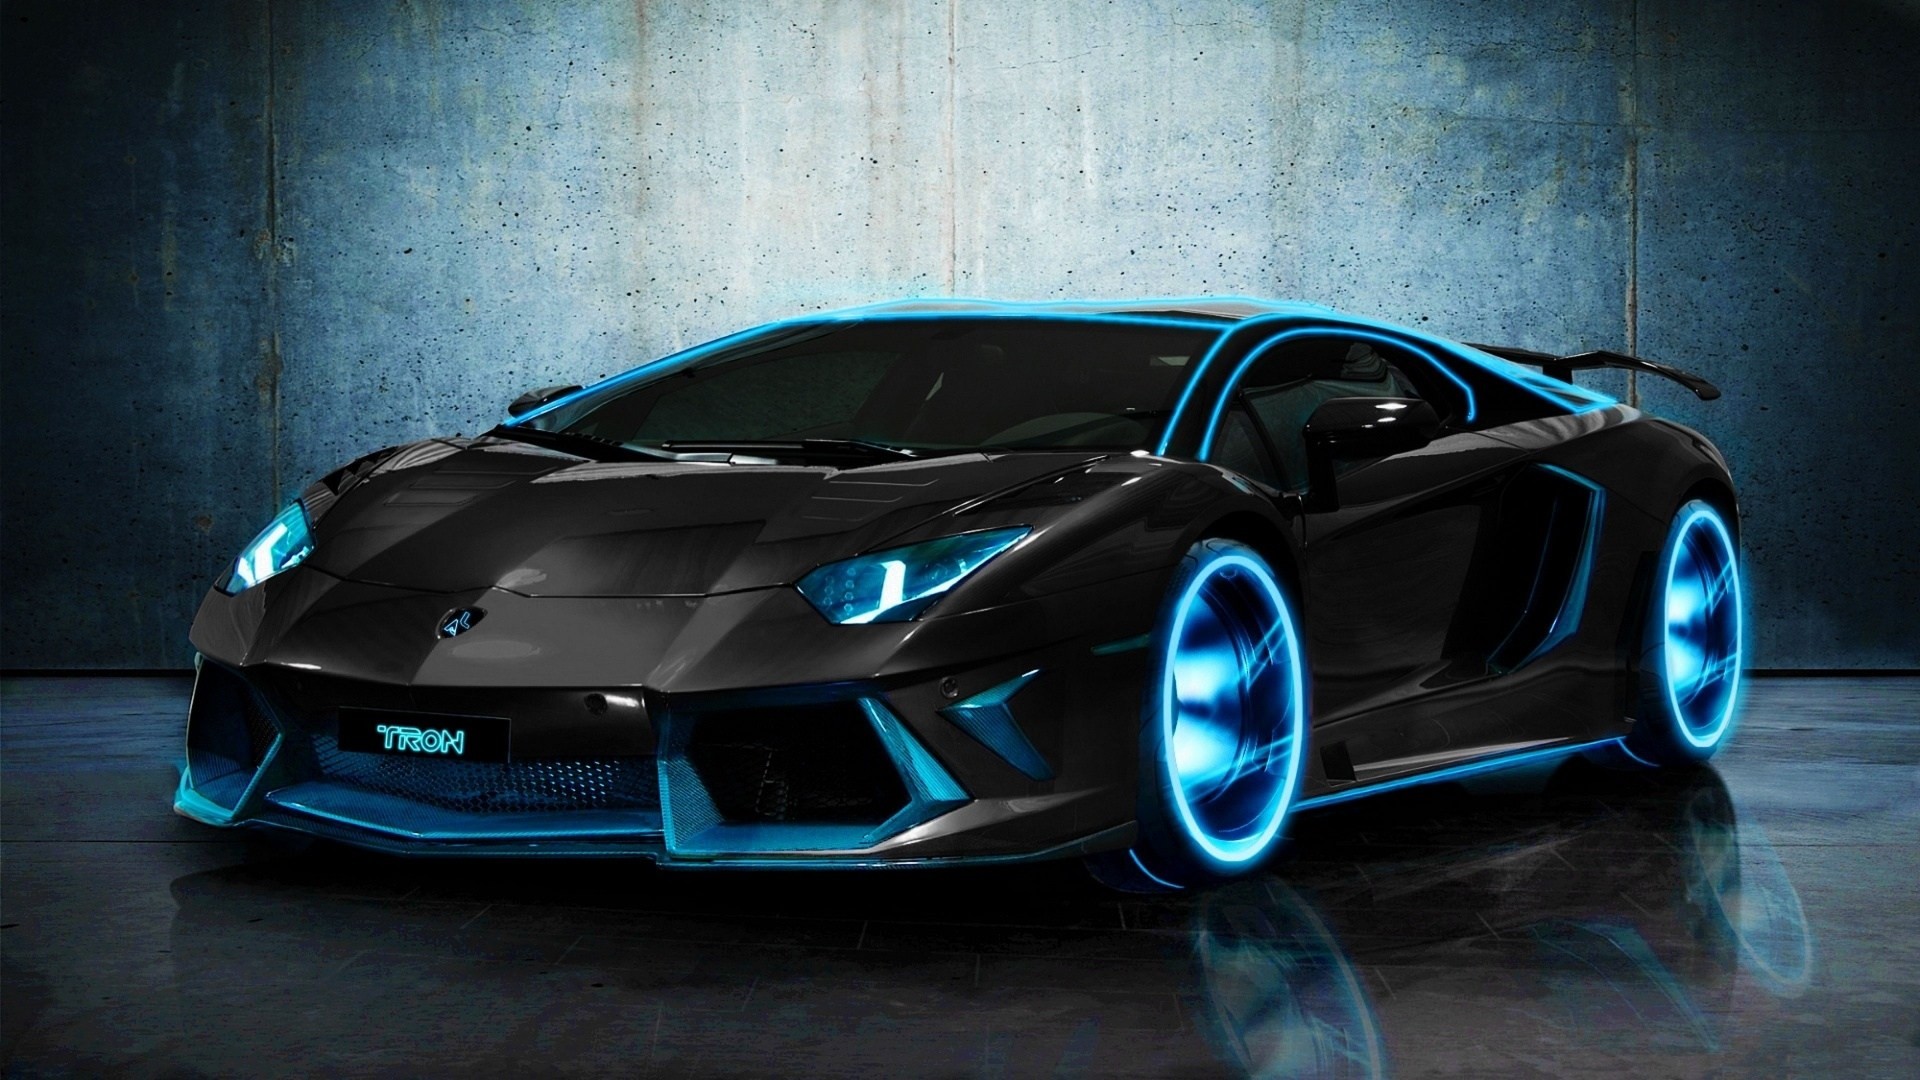 1920x1080 XI464: Cool Exotic Car Wallpapers, Exotic Car Pictures In High .